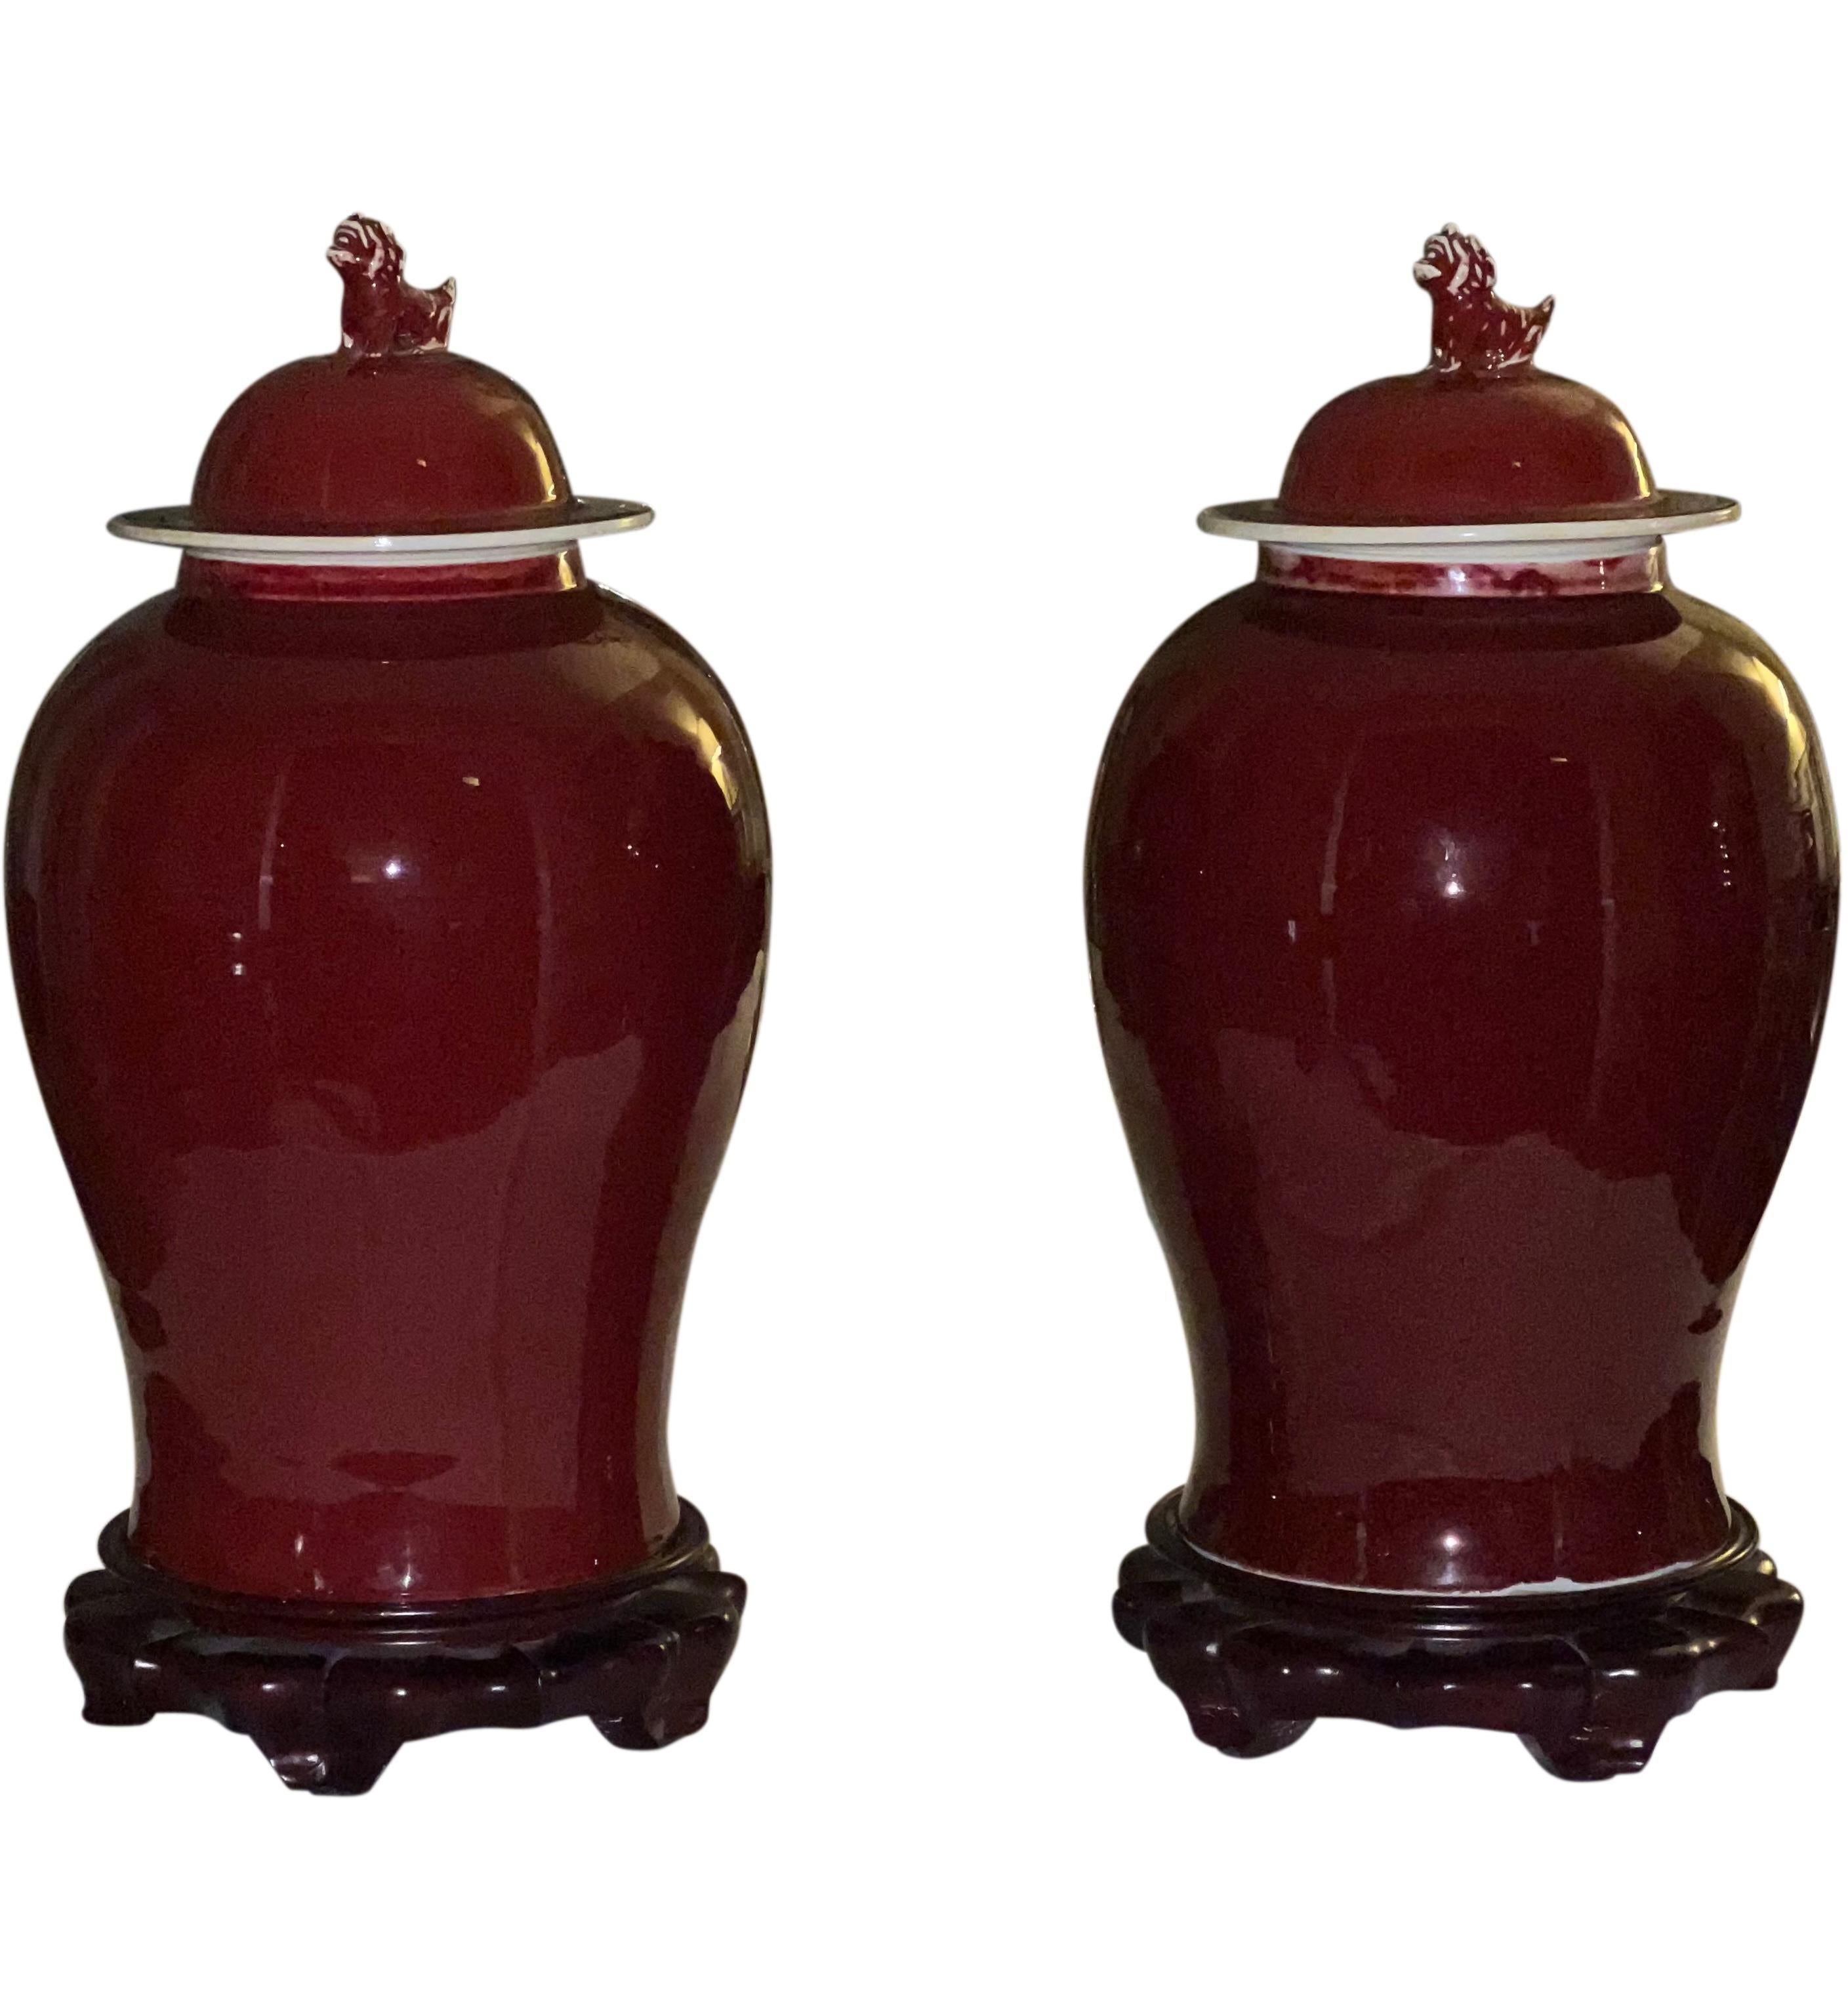 Beautiful pair of Chinese Sang de Boeuf glazed ginger jars on rosewood stands. The jars feature protective Chinese guardian lions, known as foo dogs in the West, on the tops of the lids. A deep Sang de Boeuf (oxblood) glaze give the jars gorgeous